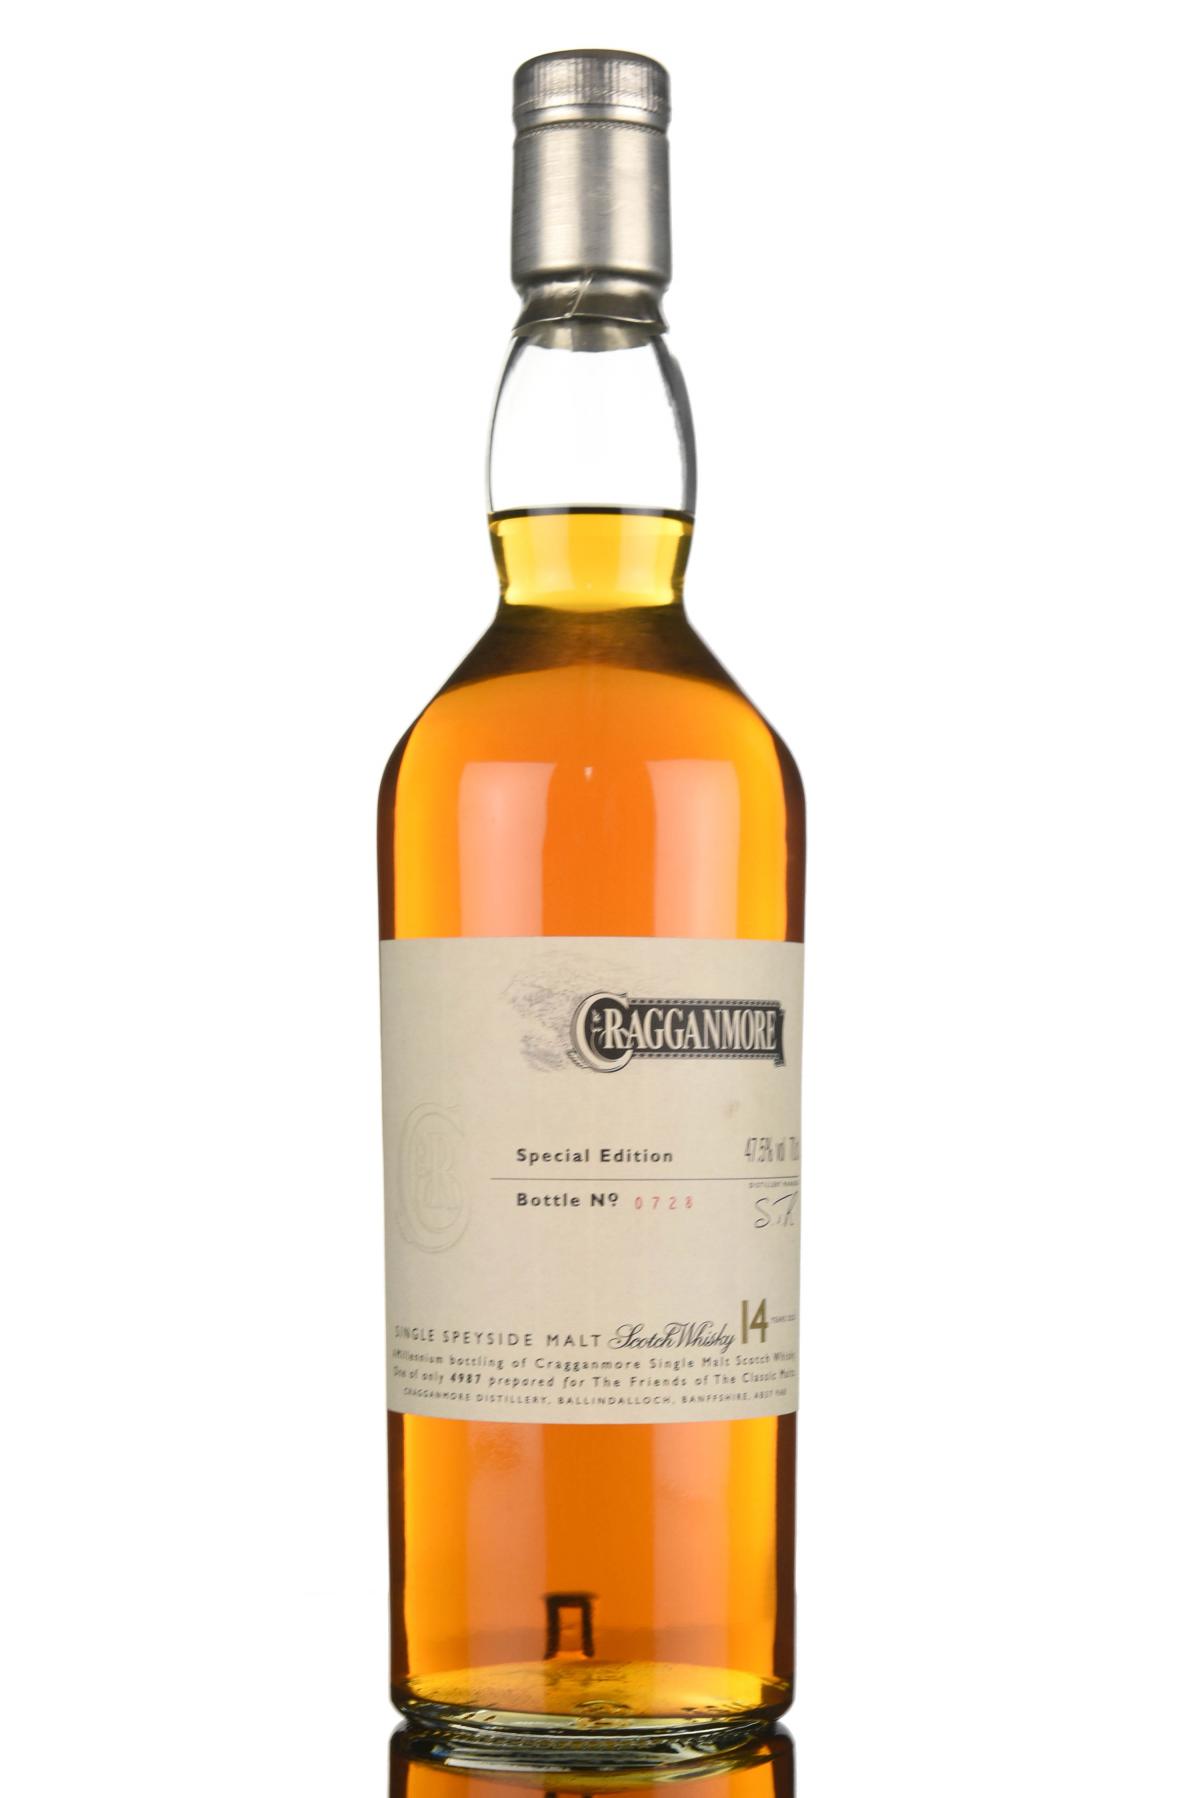 Cragganmore 14 Year Old - Friends Of The Classic Malts